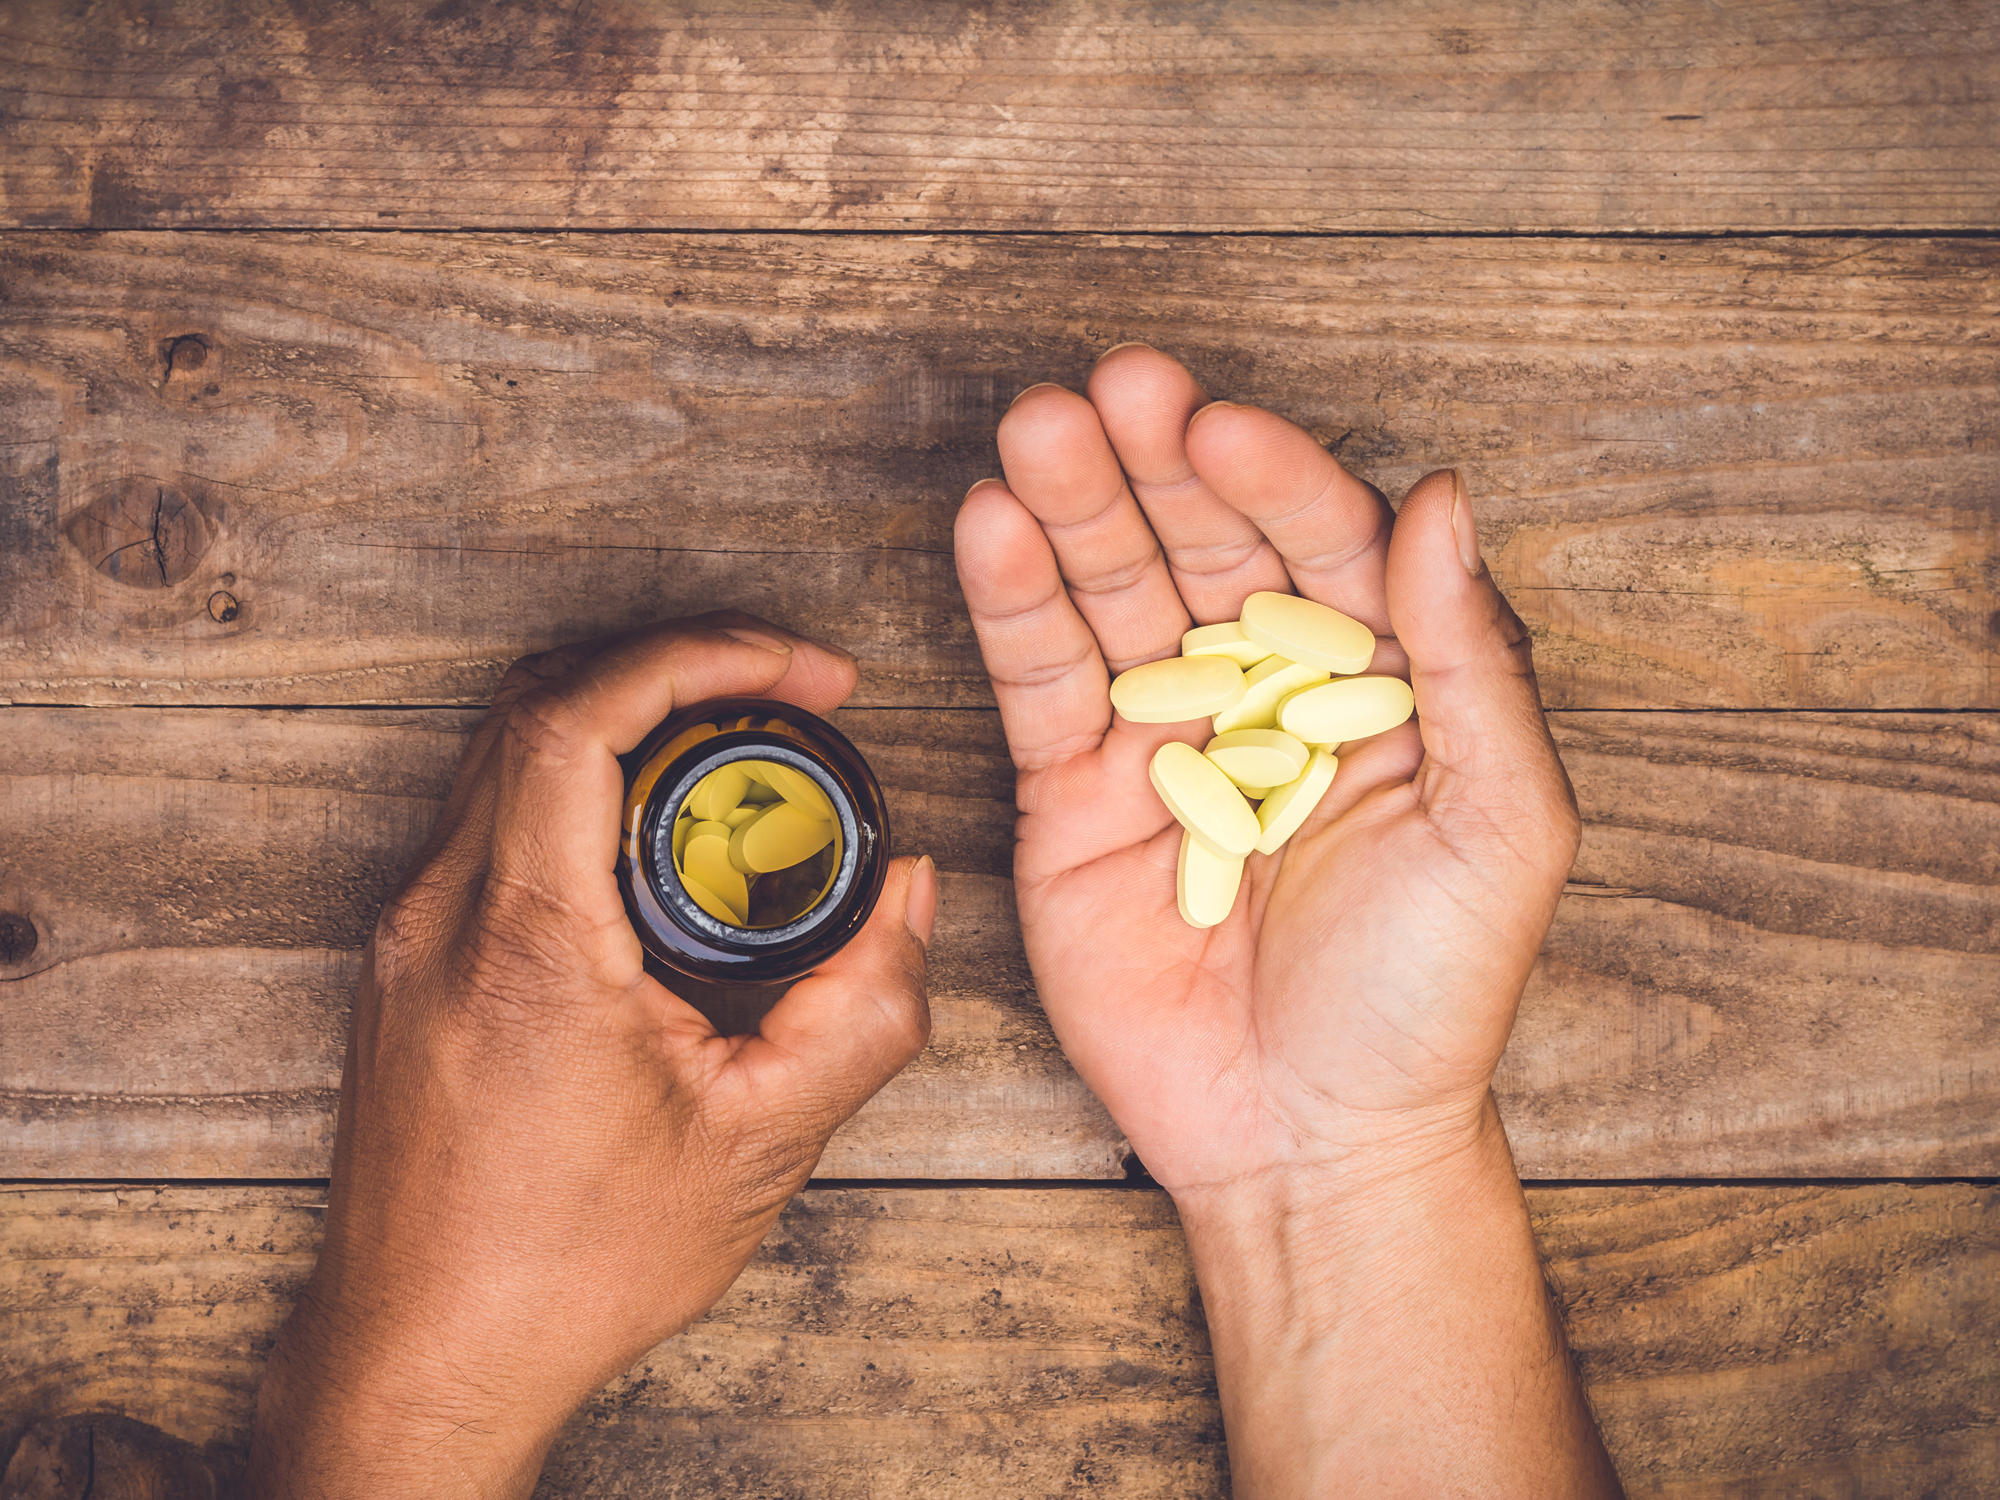 Fish oil may delay prostate cancer progression